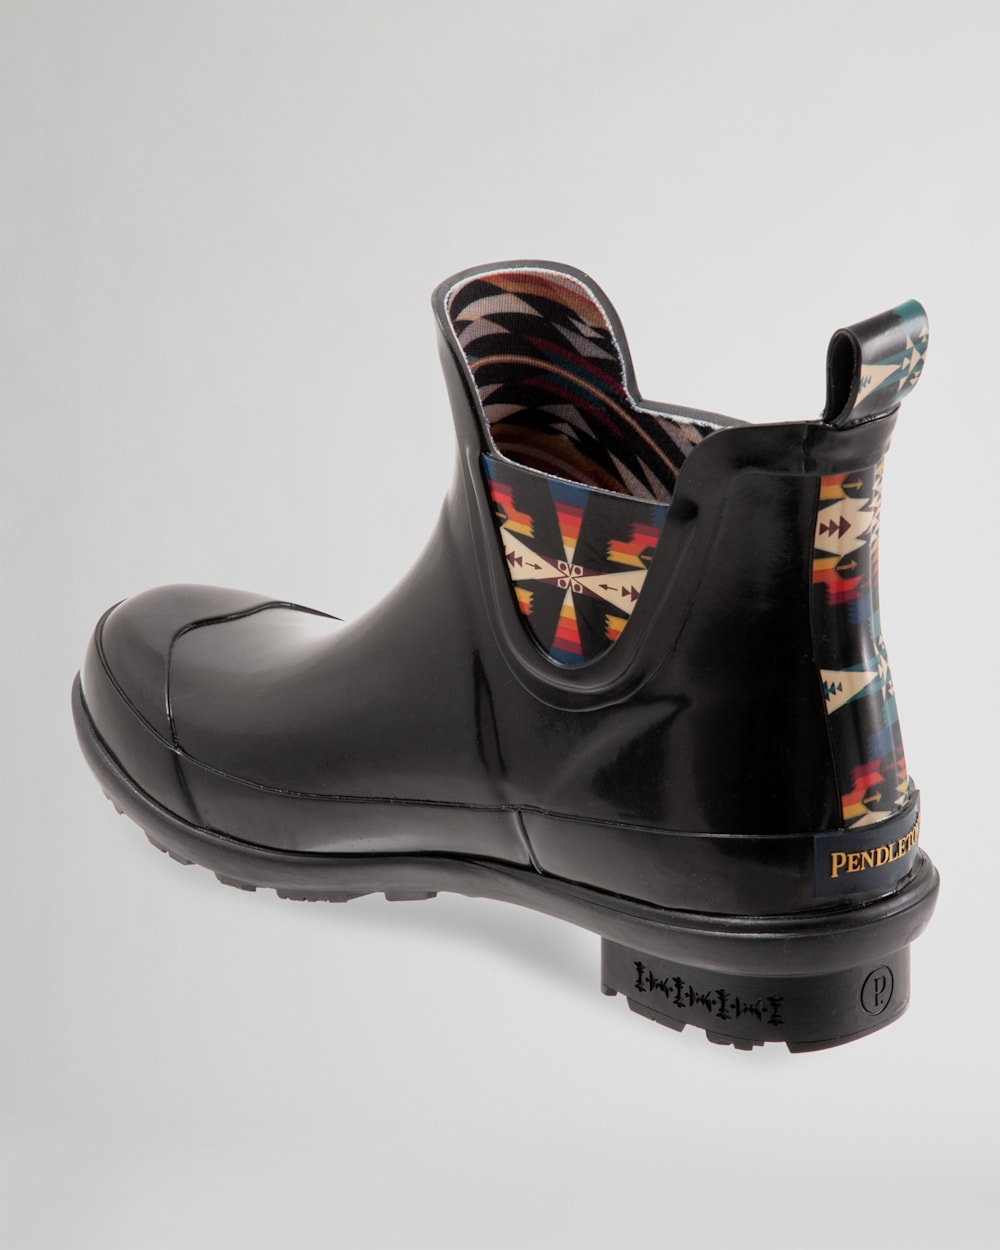 ALTERNATE VIEW OF WOMEN'S TUCSON GLOSS CHELSEA RAIN BOOTS IN BLACK image number 3